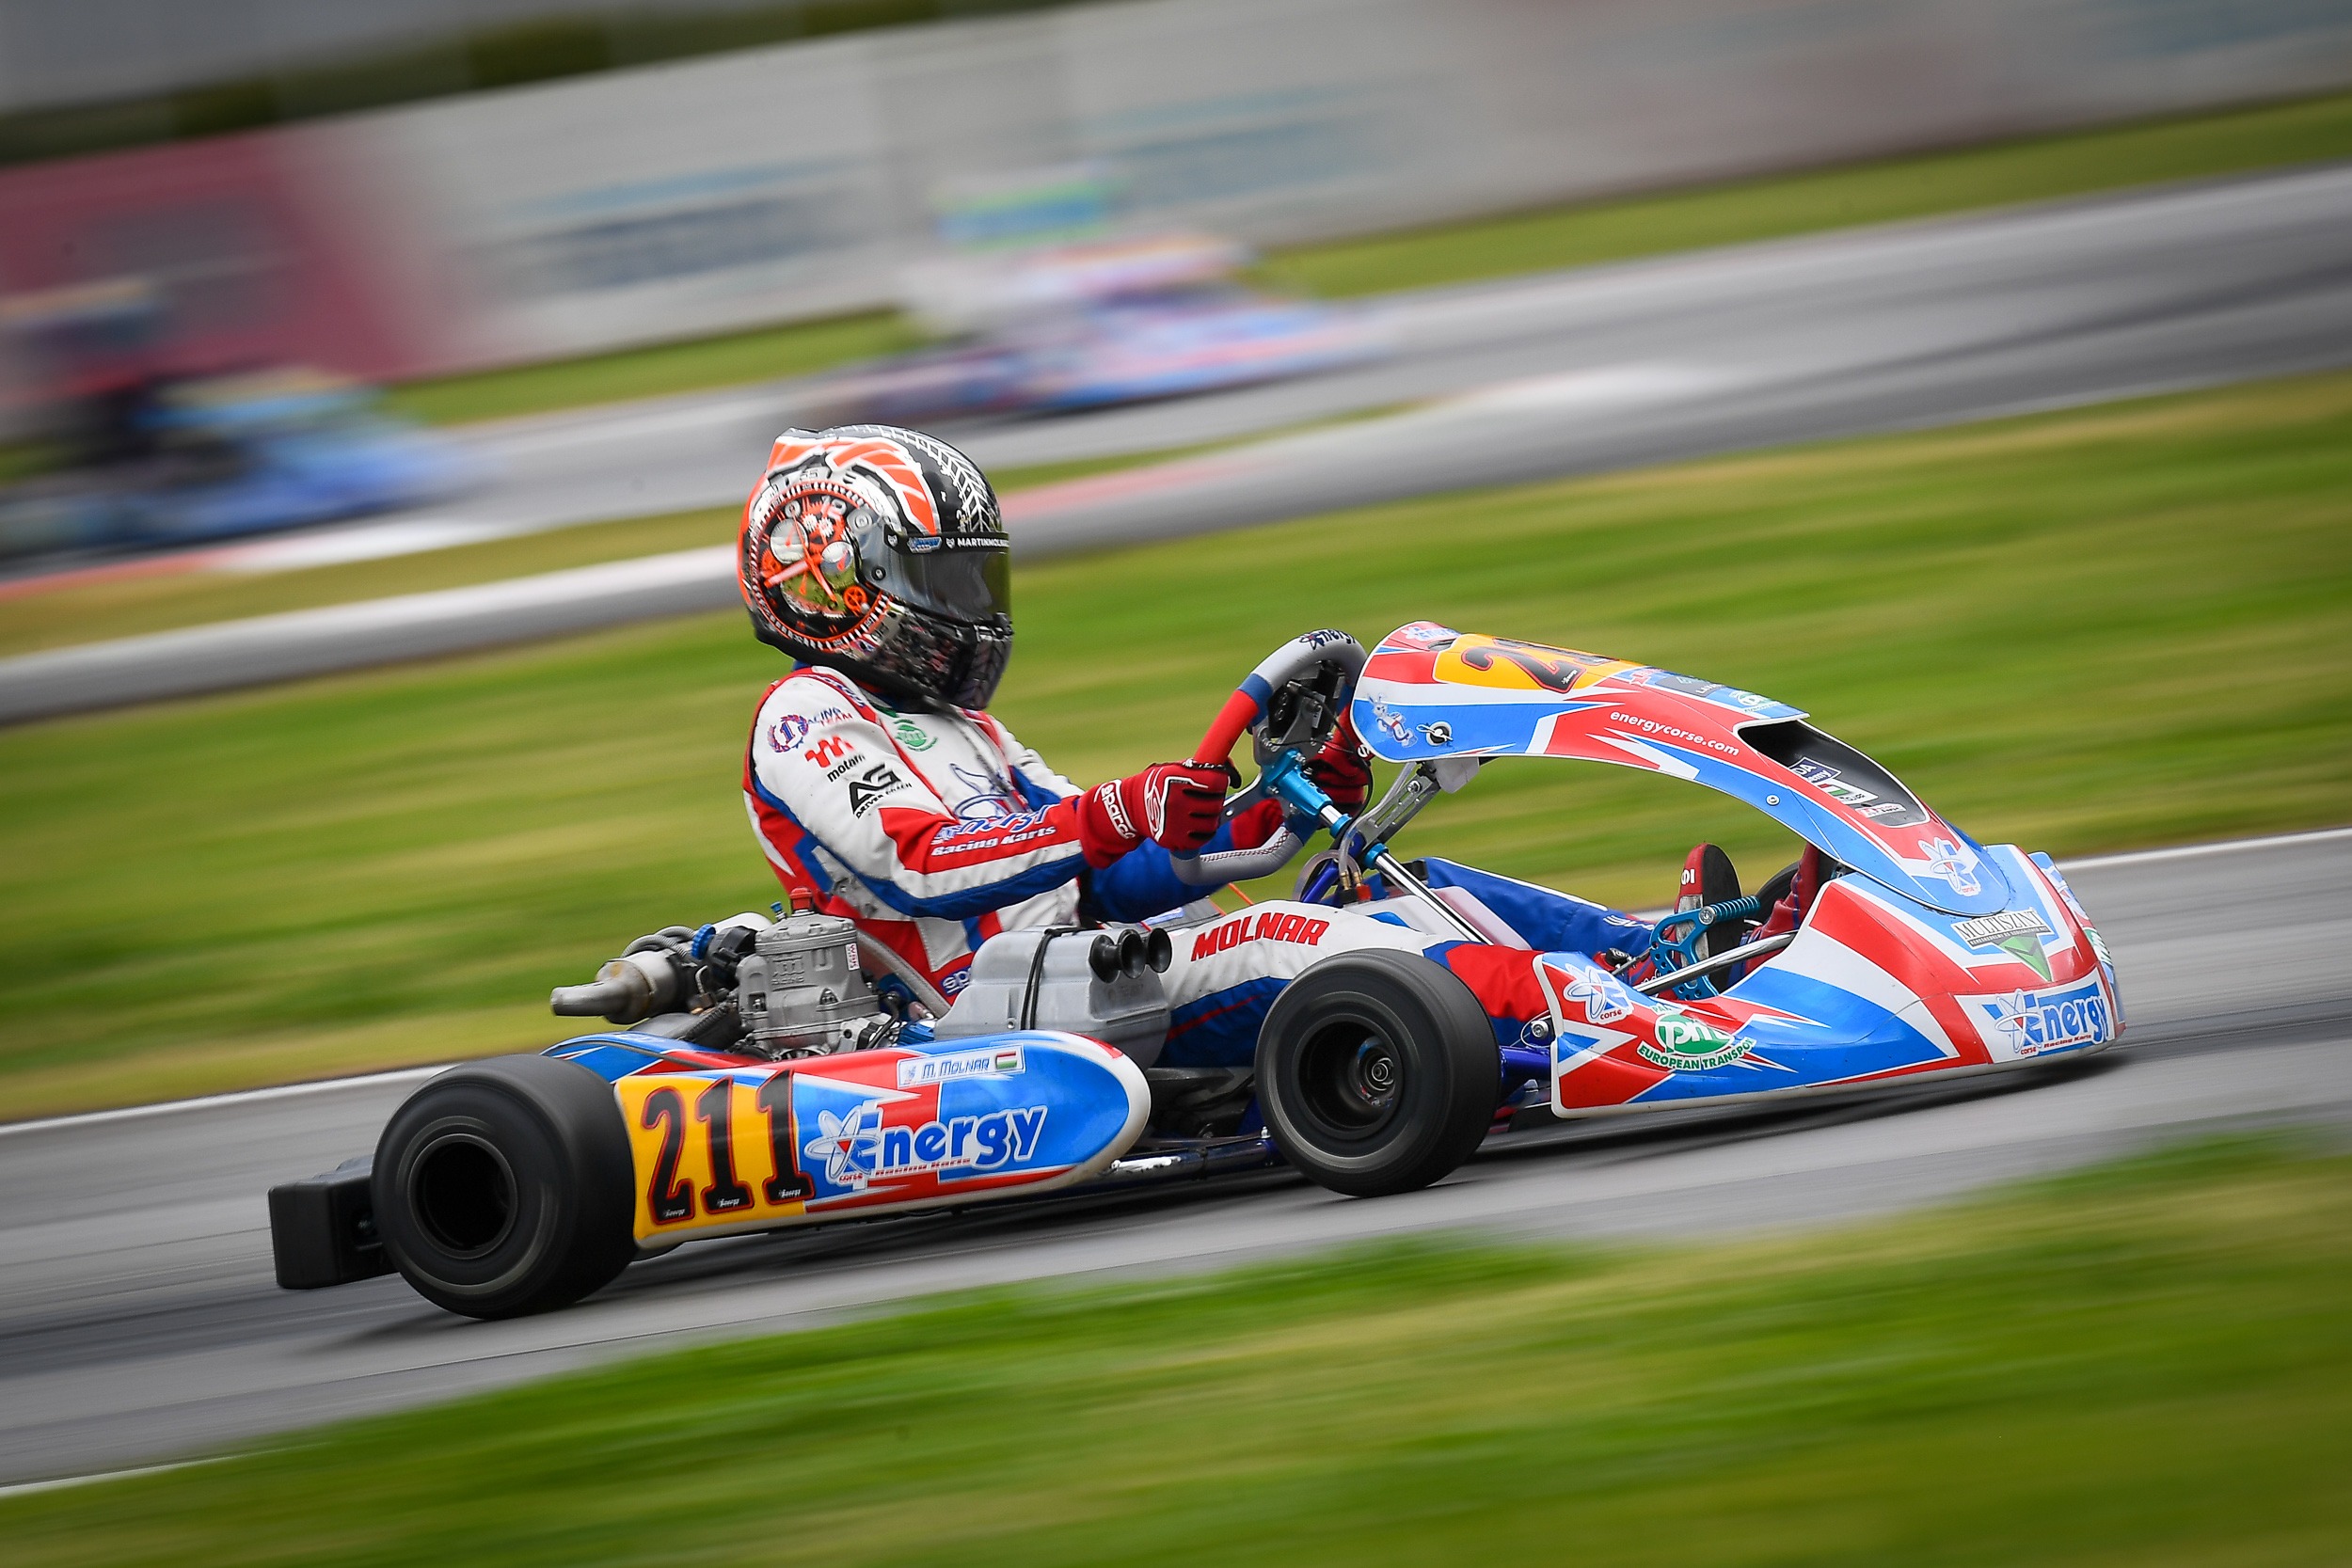 Martin Molnár in the Final again at WSK Super Master Series and took a Heat victory